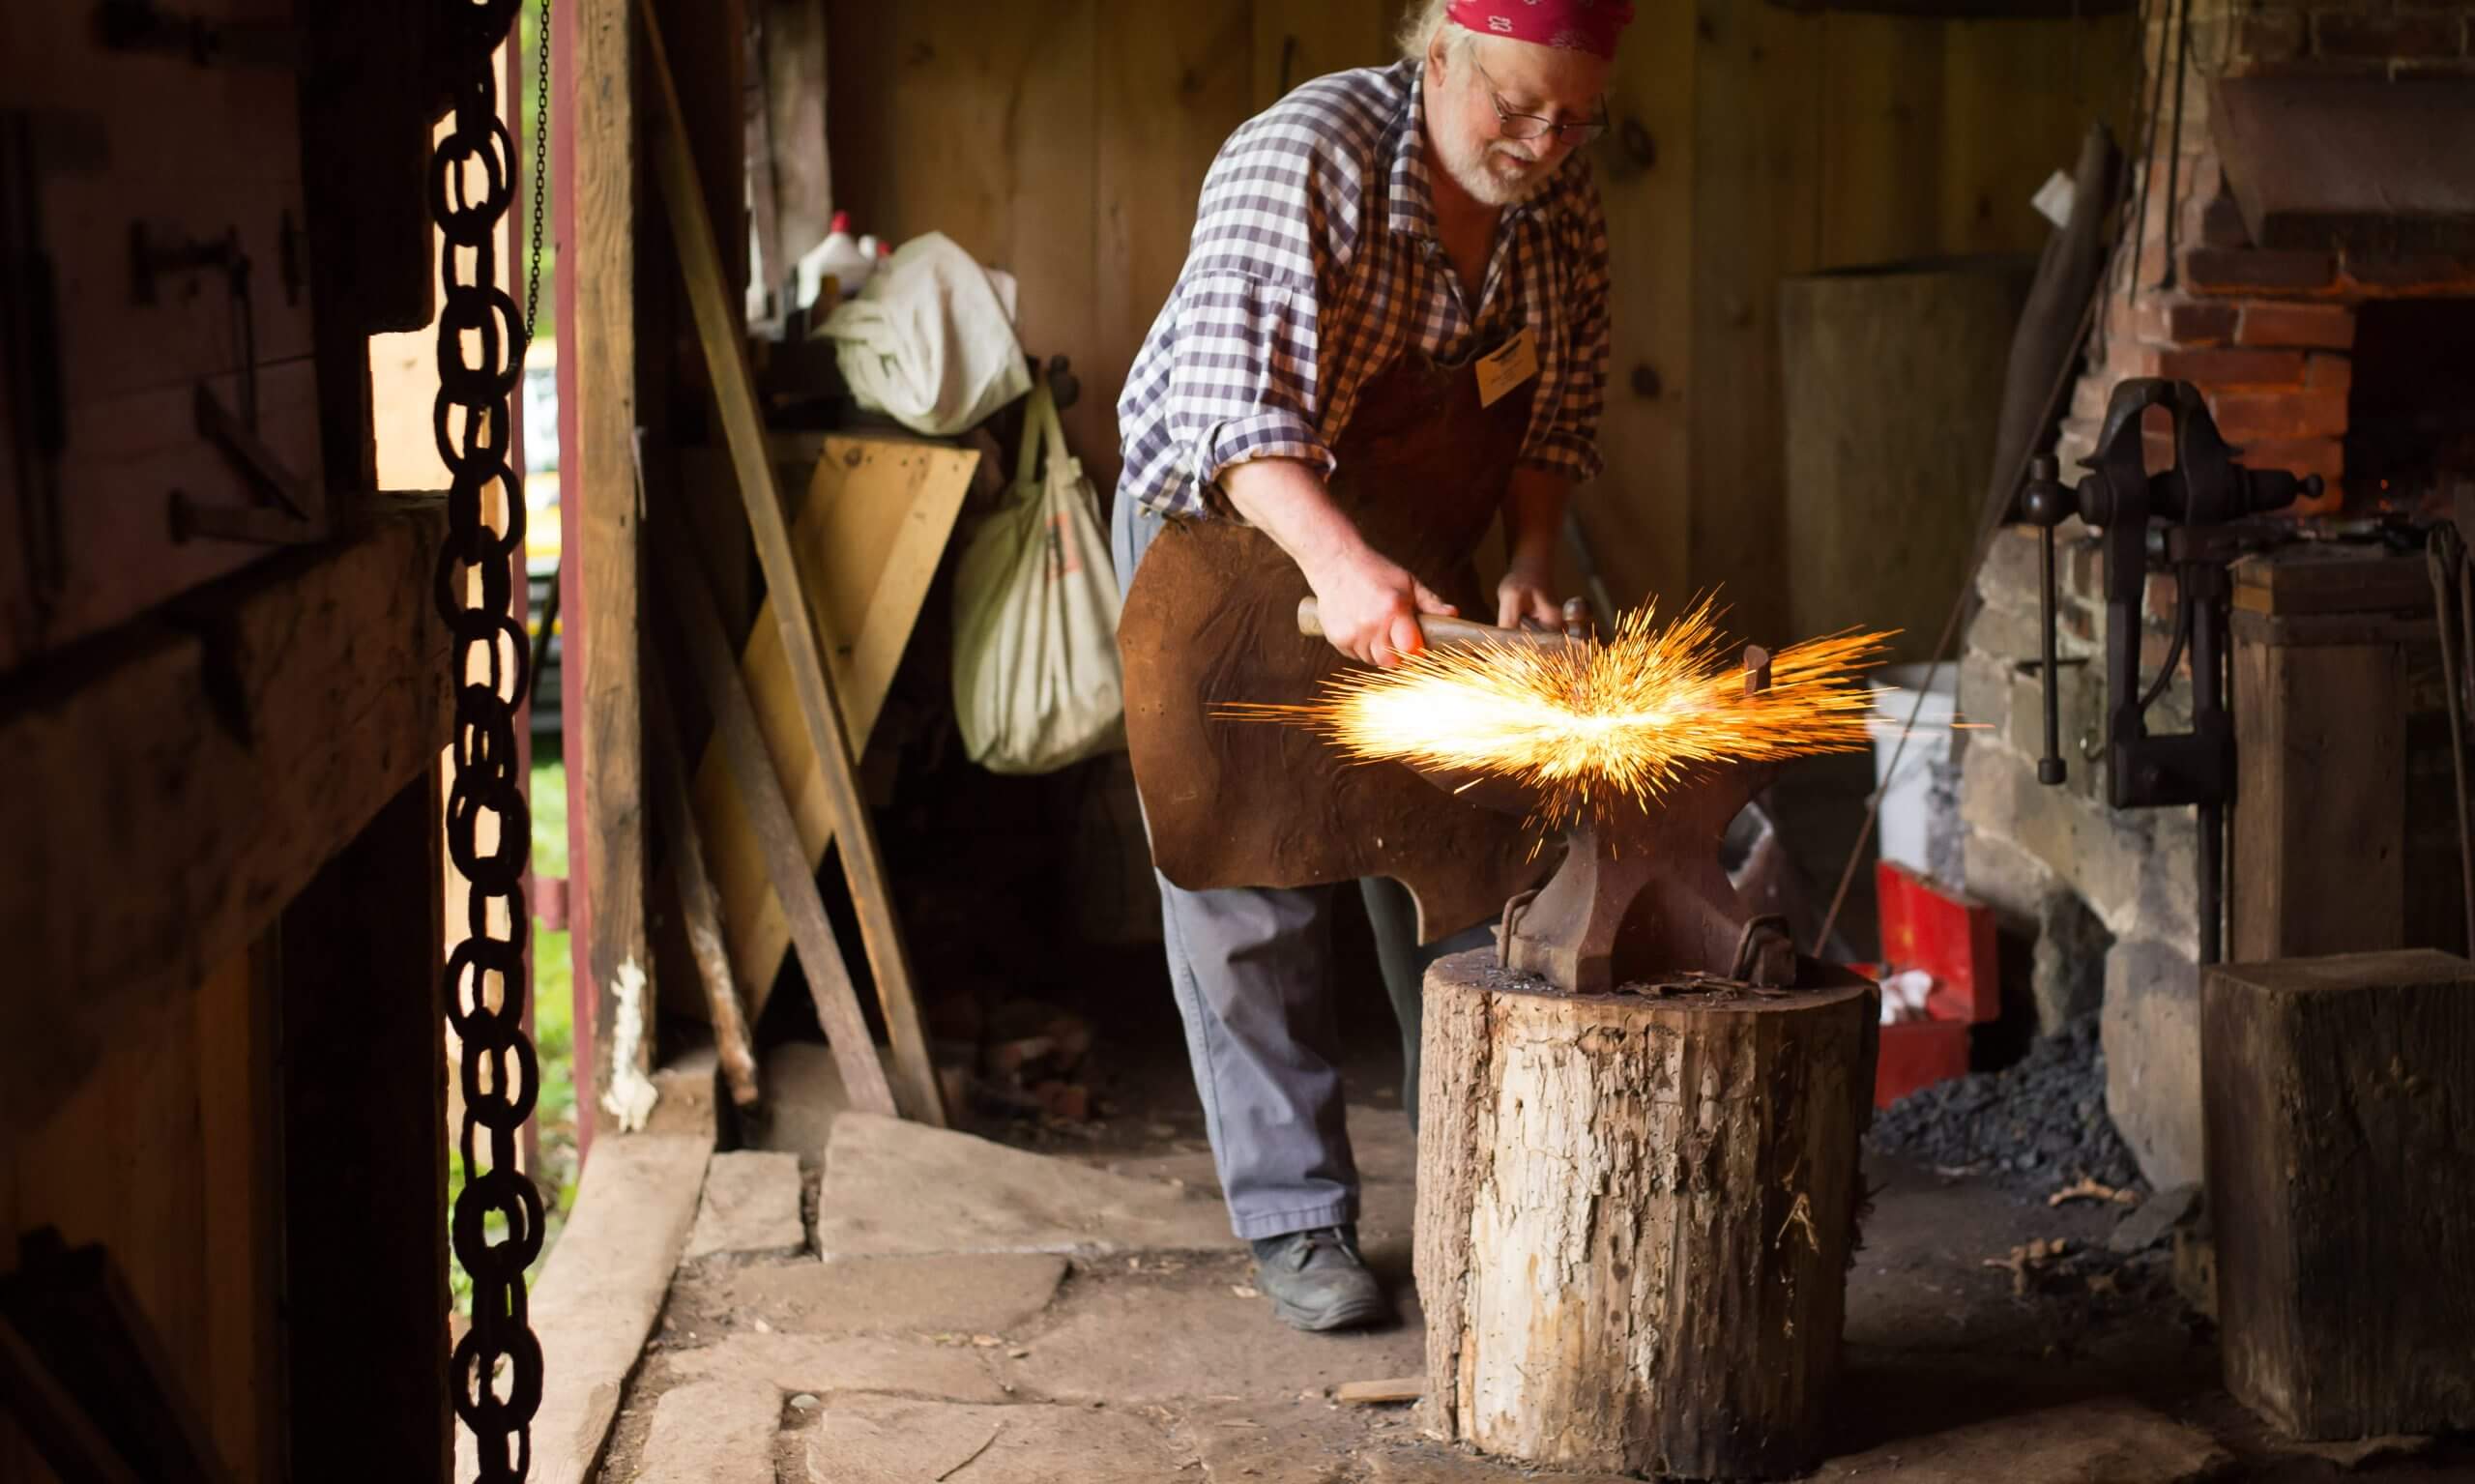 A metal smith wearing a bandana and a leather apron looks down at his work with tools in hand. Sparks fly from the item below him.